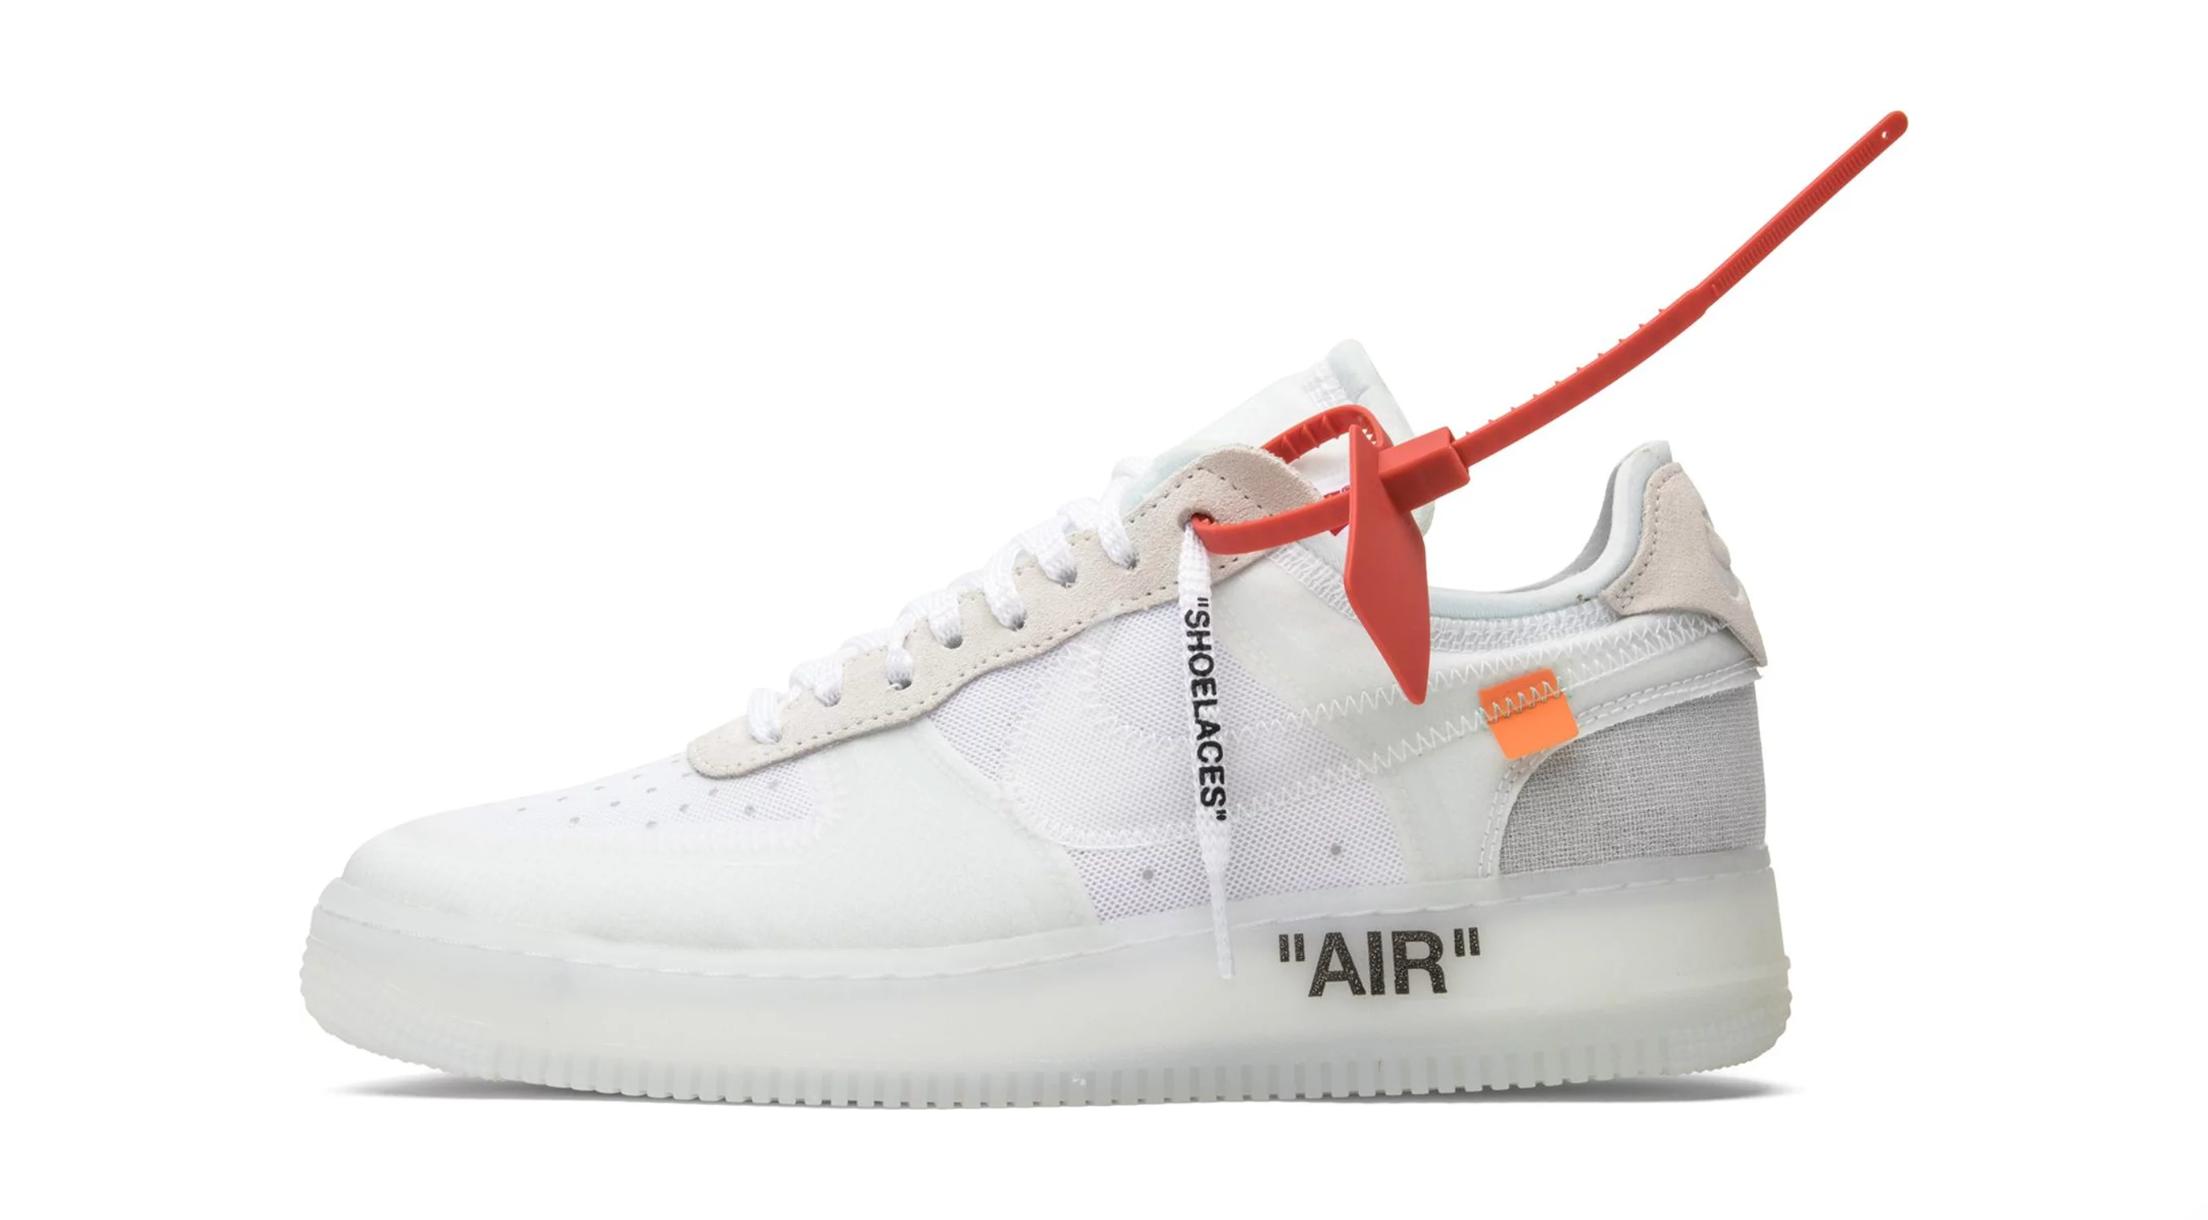 Off-white X Nike Air Force 1 'THE TEN' Collection 